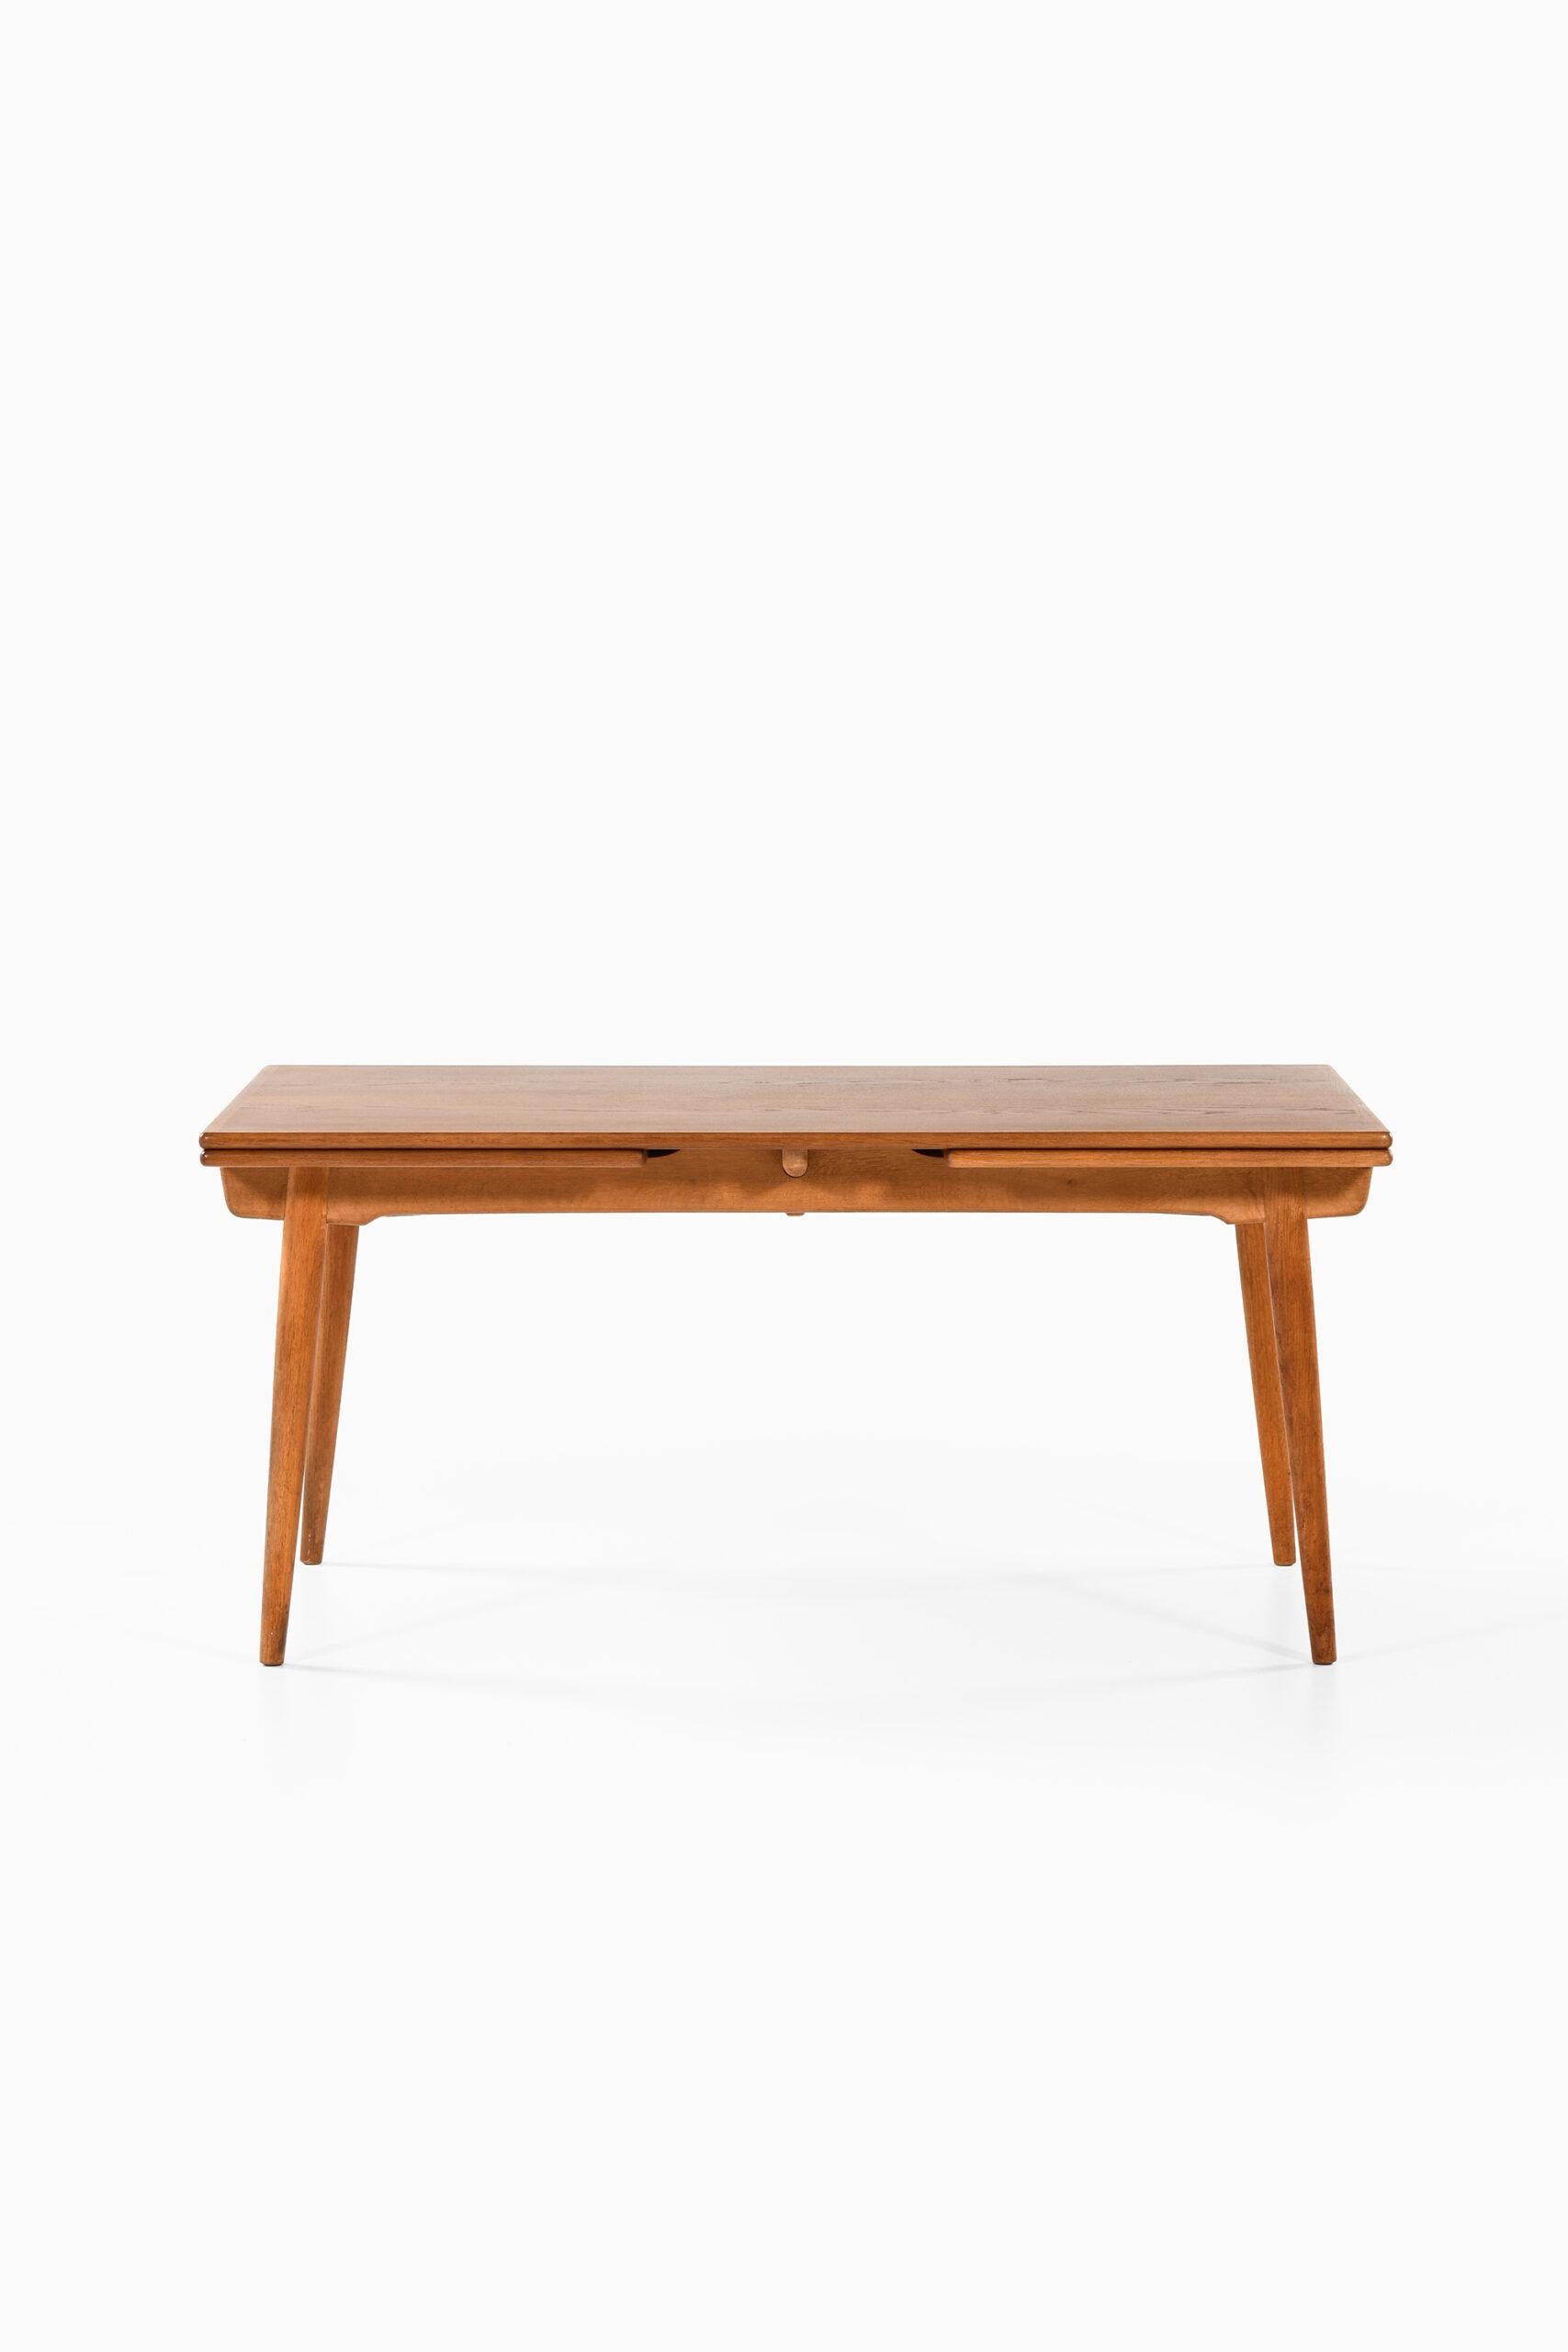 Hans Wegner Dining Table Model AT-312 Produced by Andreas Tuck in Denmark For Sale 2